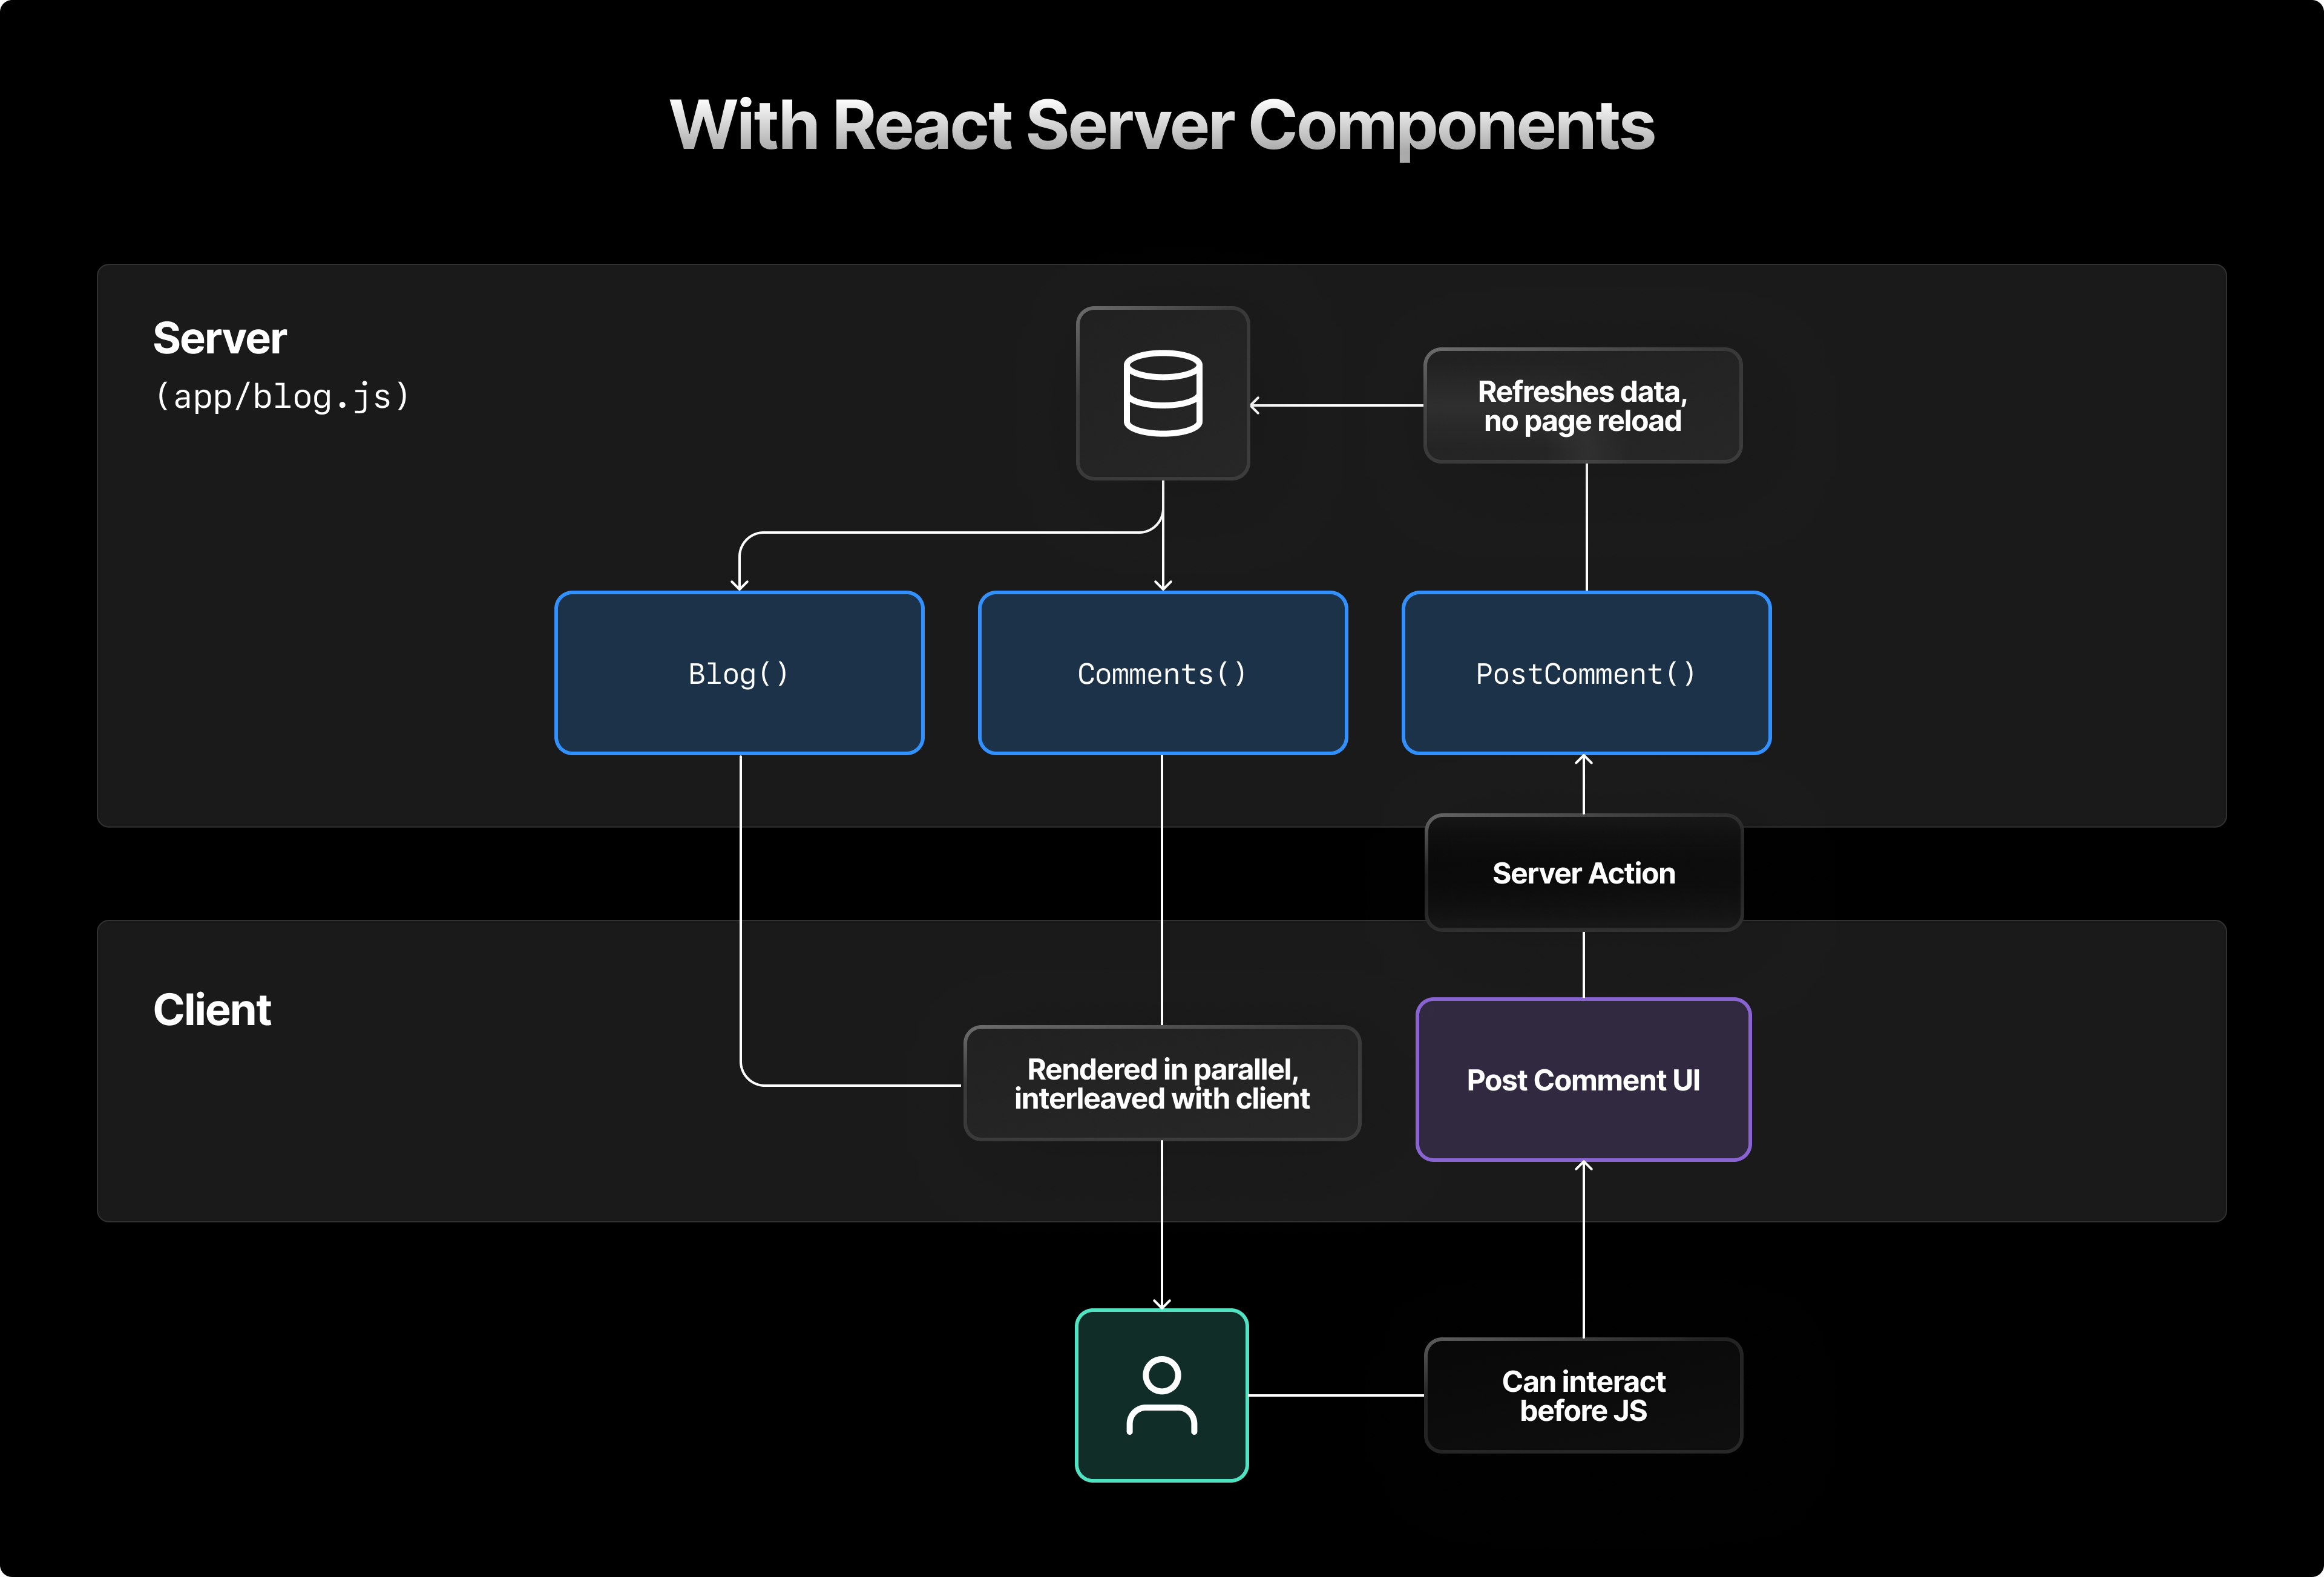 In Next.js with React Server Components, data fetching and UI rendering can be done from the same component. Additionally, Server Actions provide a way for users to interact with server-side data before JavaScript loads on the page.